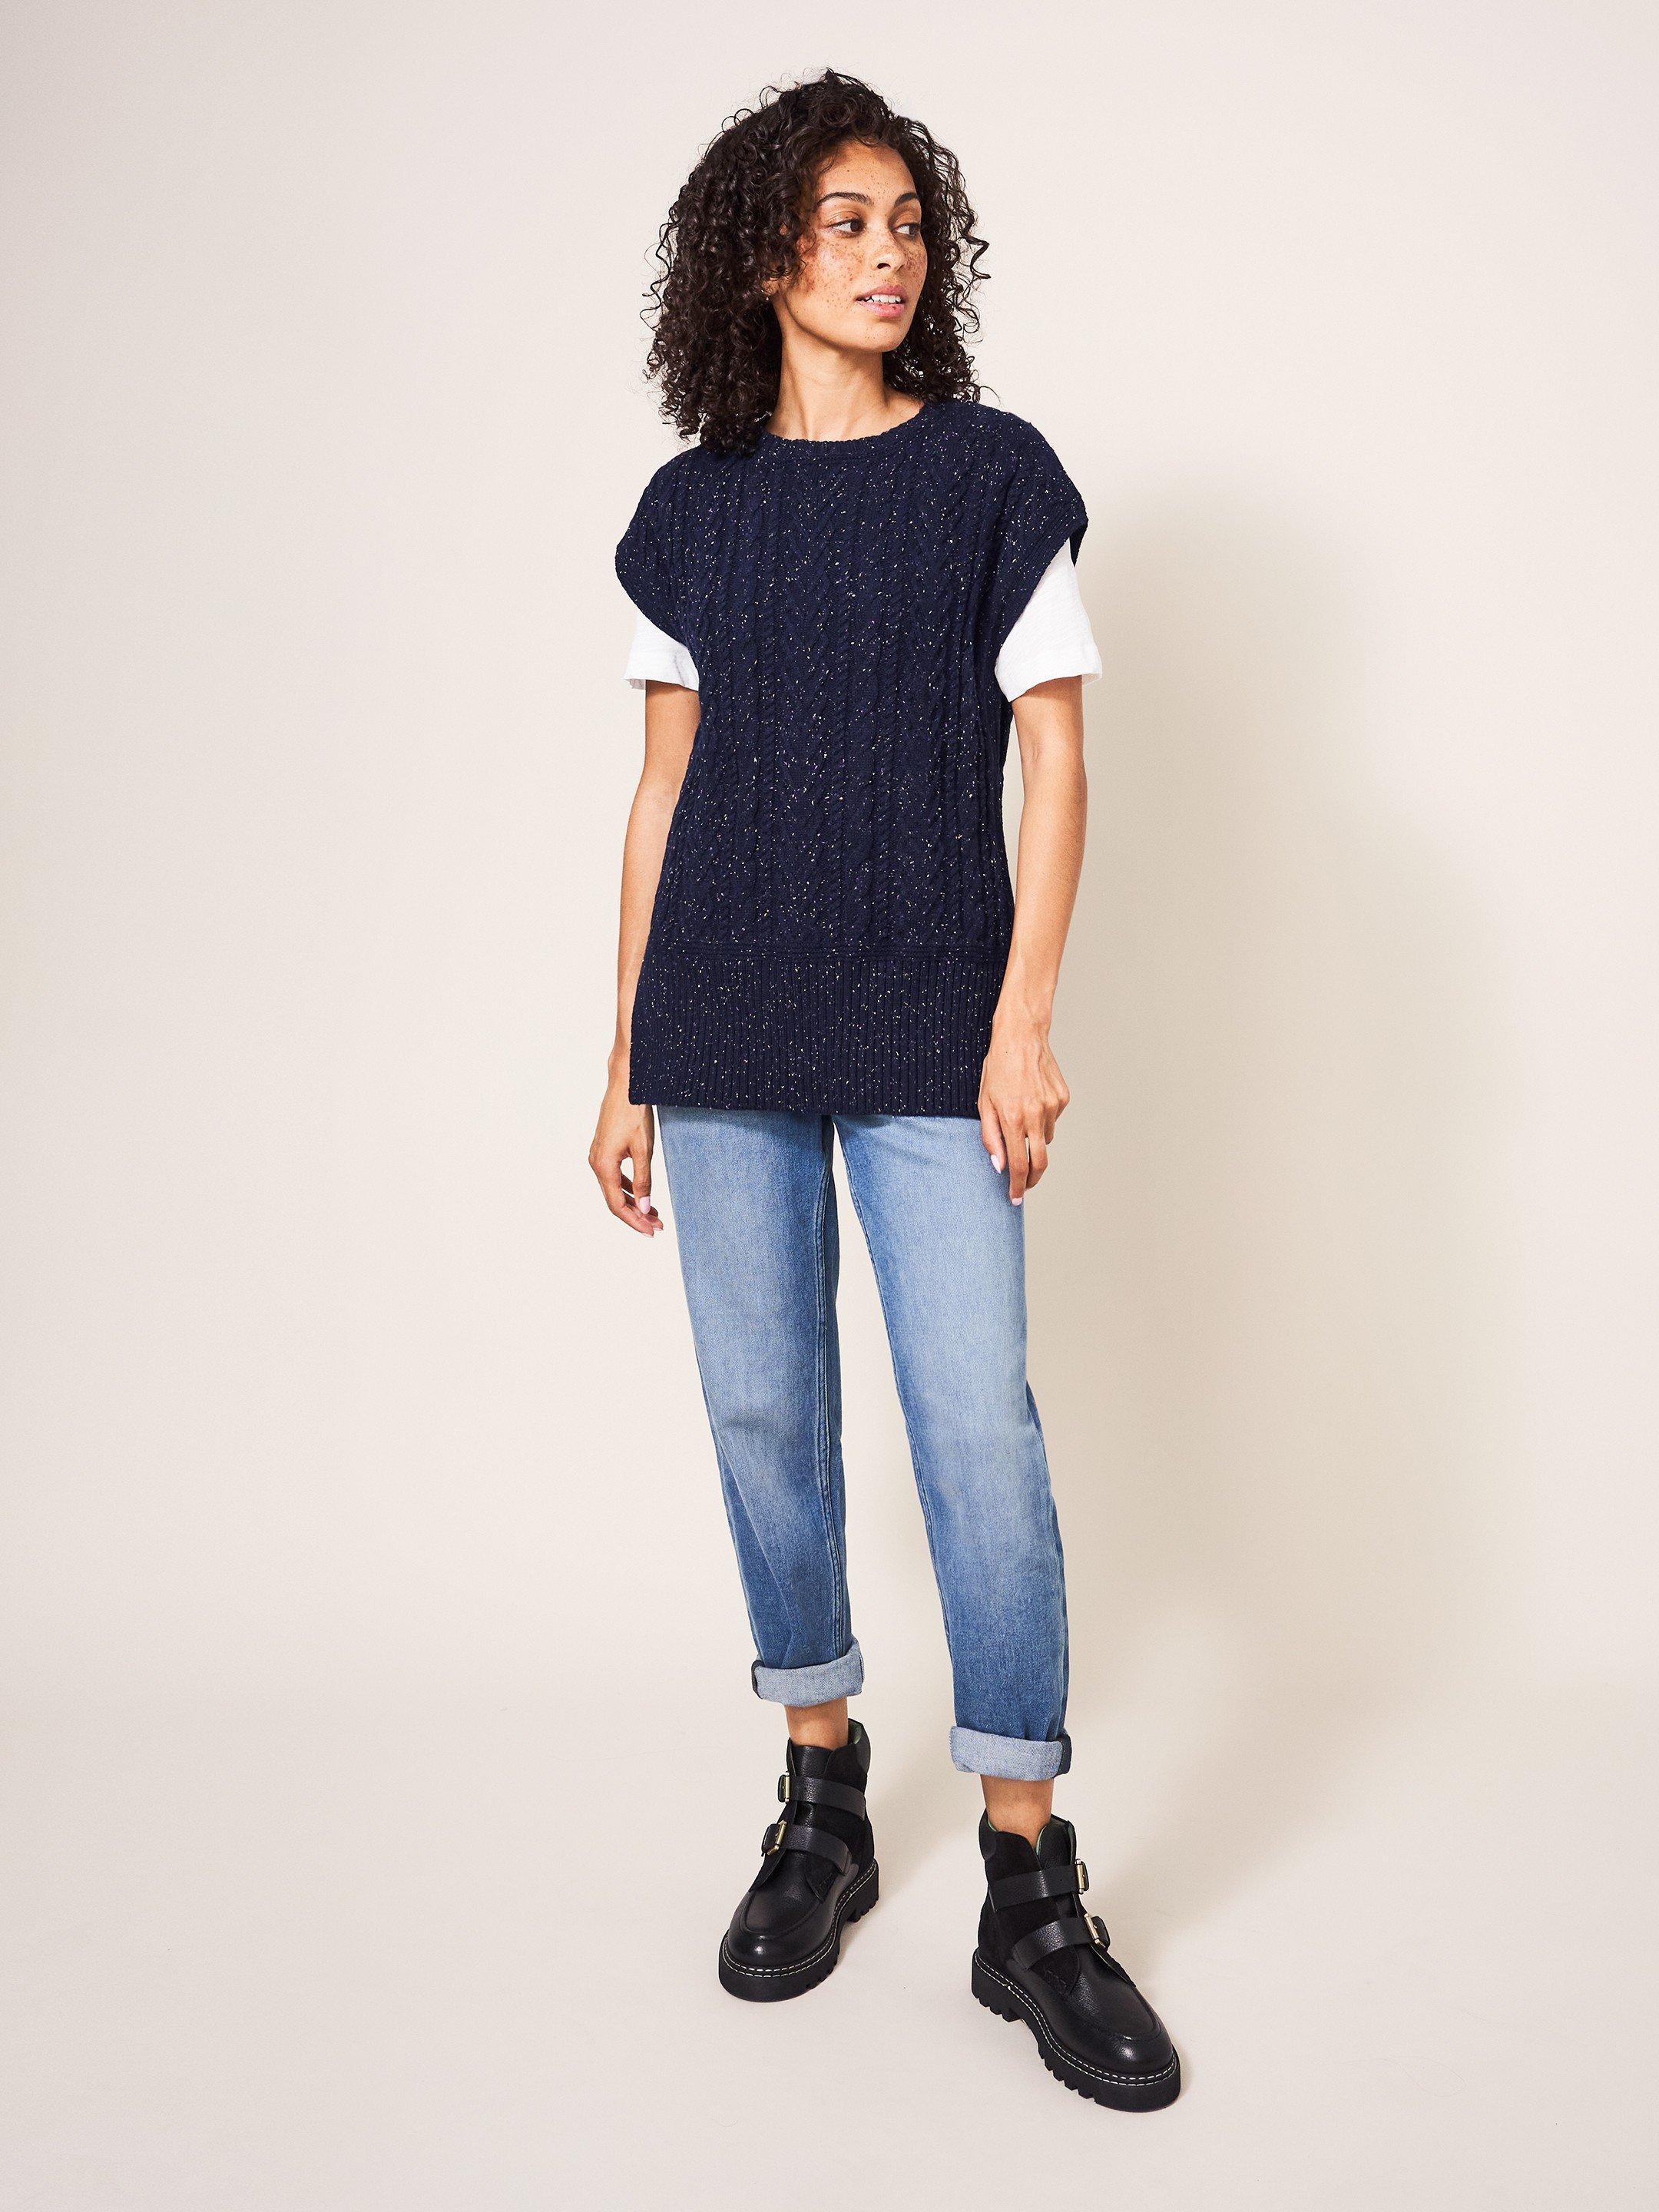 CABLE NEP TANK in DARK NAVY - MODEL FRONT